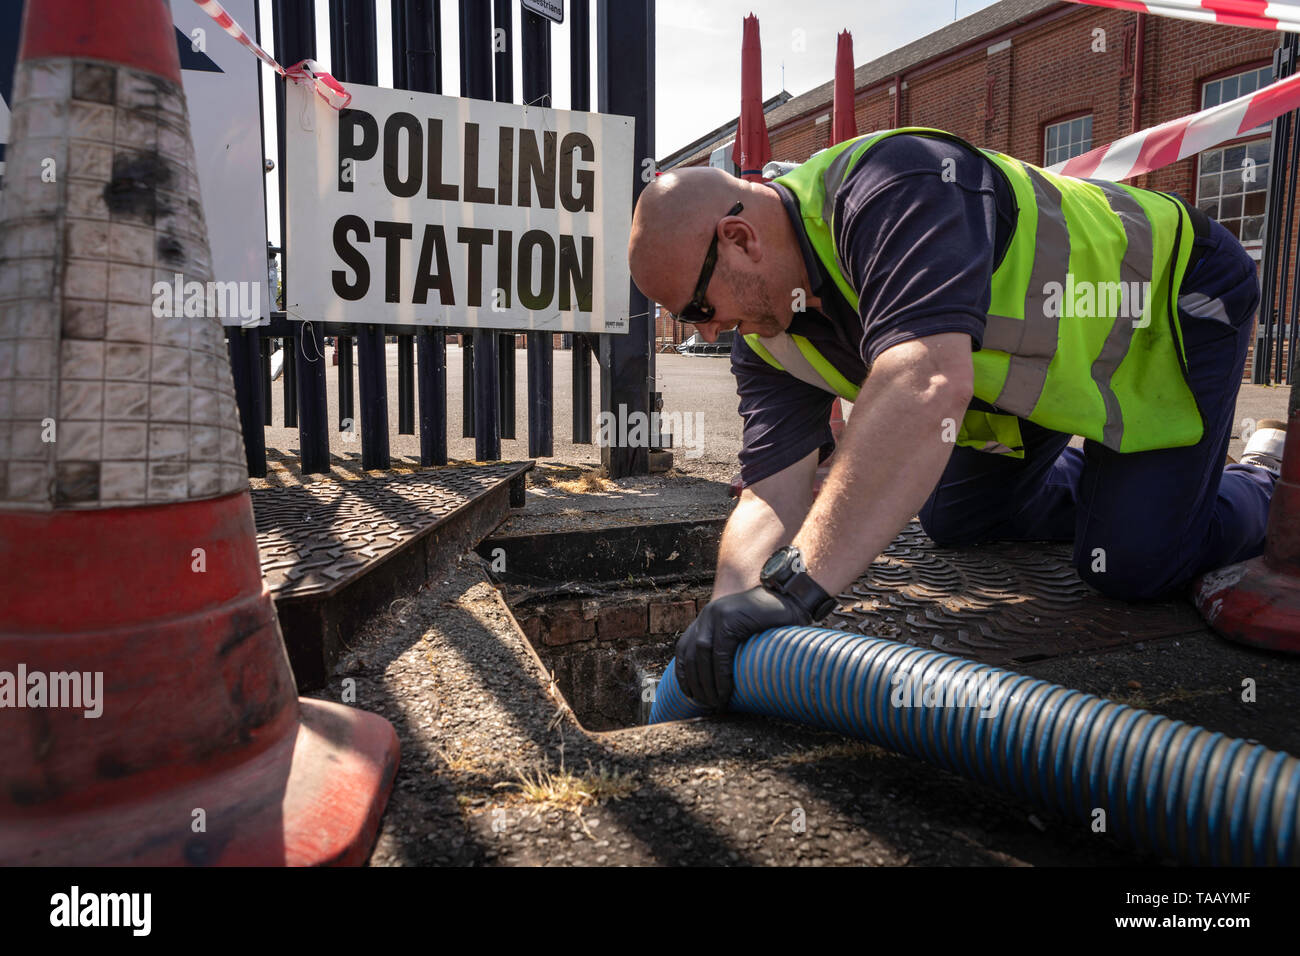 A sanitation engineer empties a cesspit outside a polling station in Gosport as voters head to the polls for the European Elections today. Stock Photo